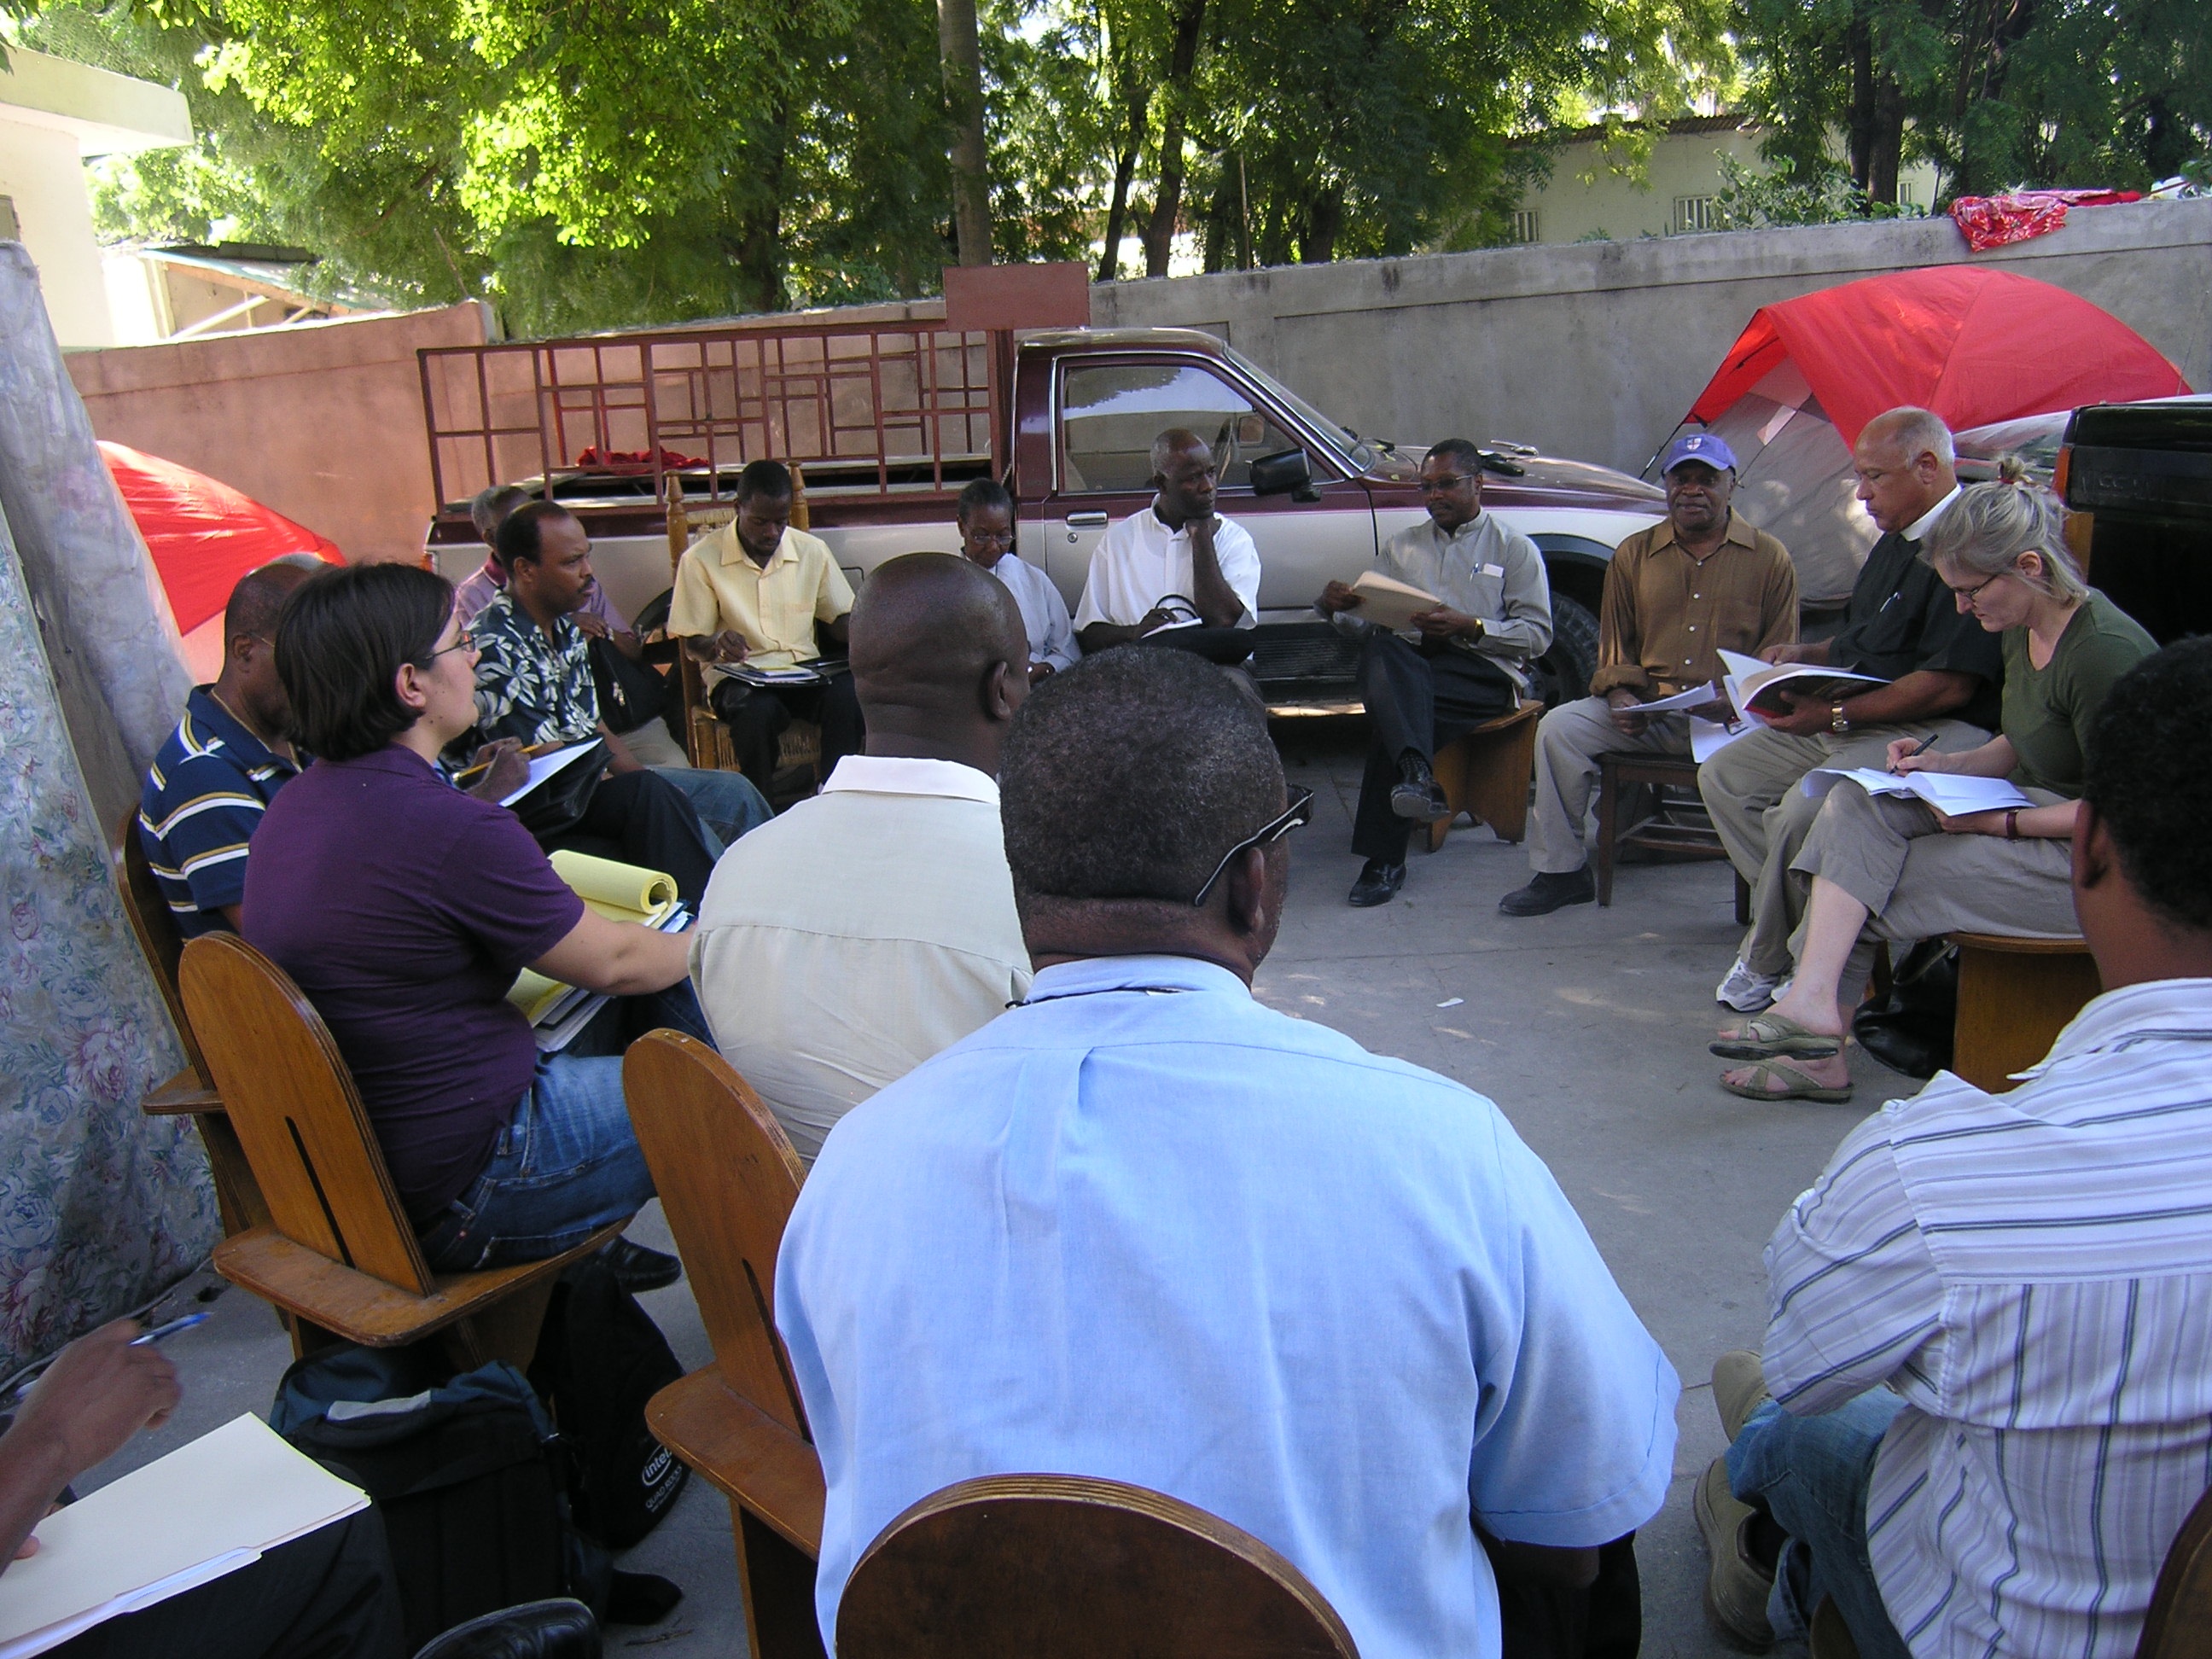 Group of women and men in a circle of wooden chairs in and outdoor lot